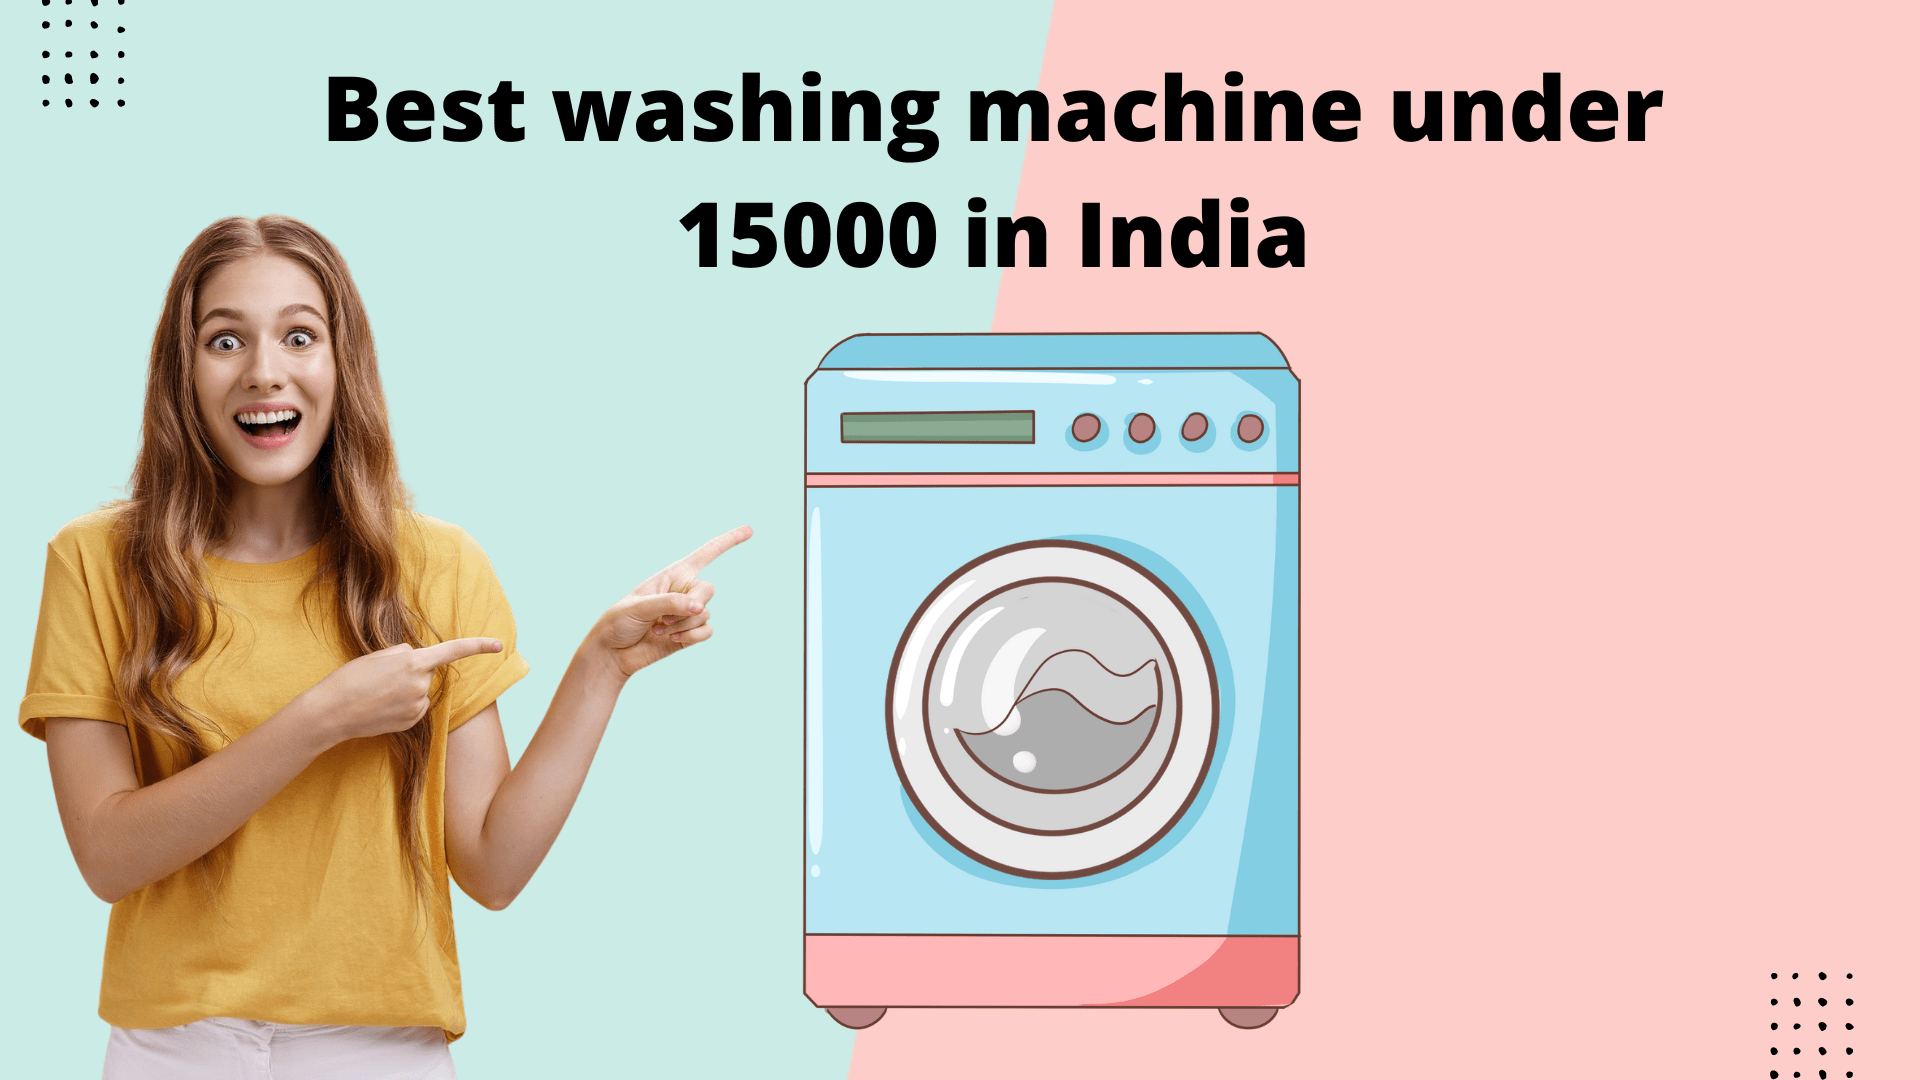 Image of girl showing best washing machine under 15000 in India